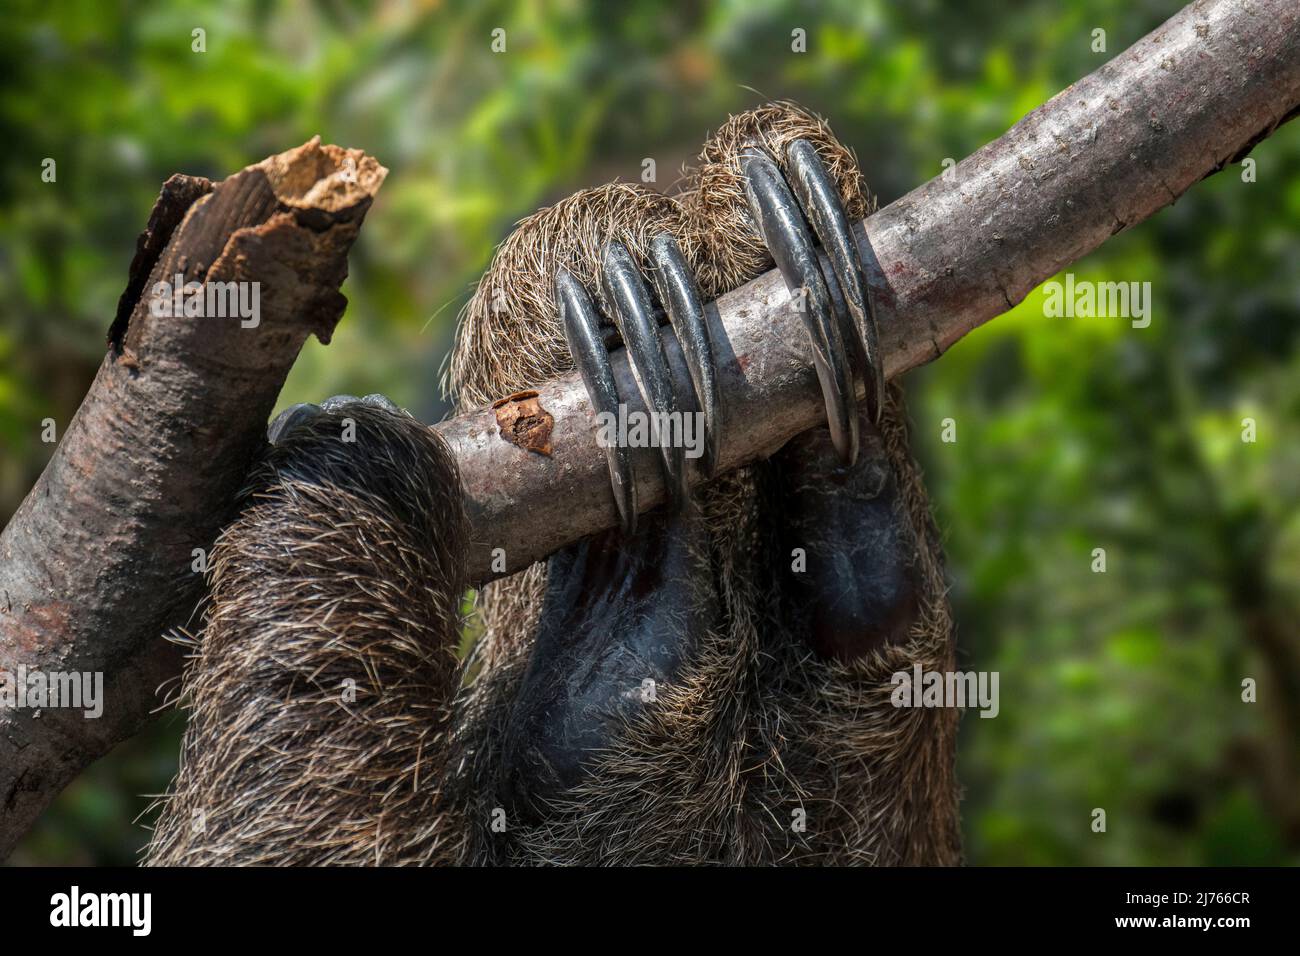 Linnaeus's two-toed sloth / southern two-toed sloth / Linne's two-toed sloth (Choloepus didactylus / Bradypus didactylus) close-up of claws Stock Photo